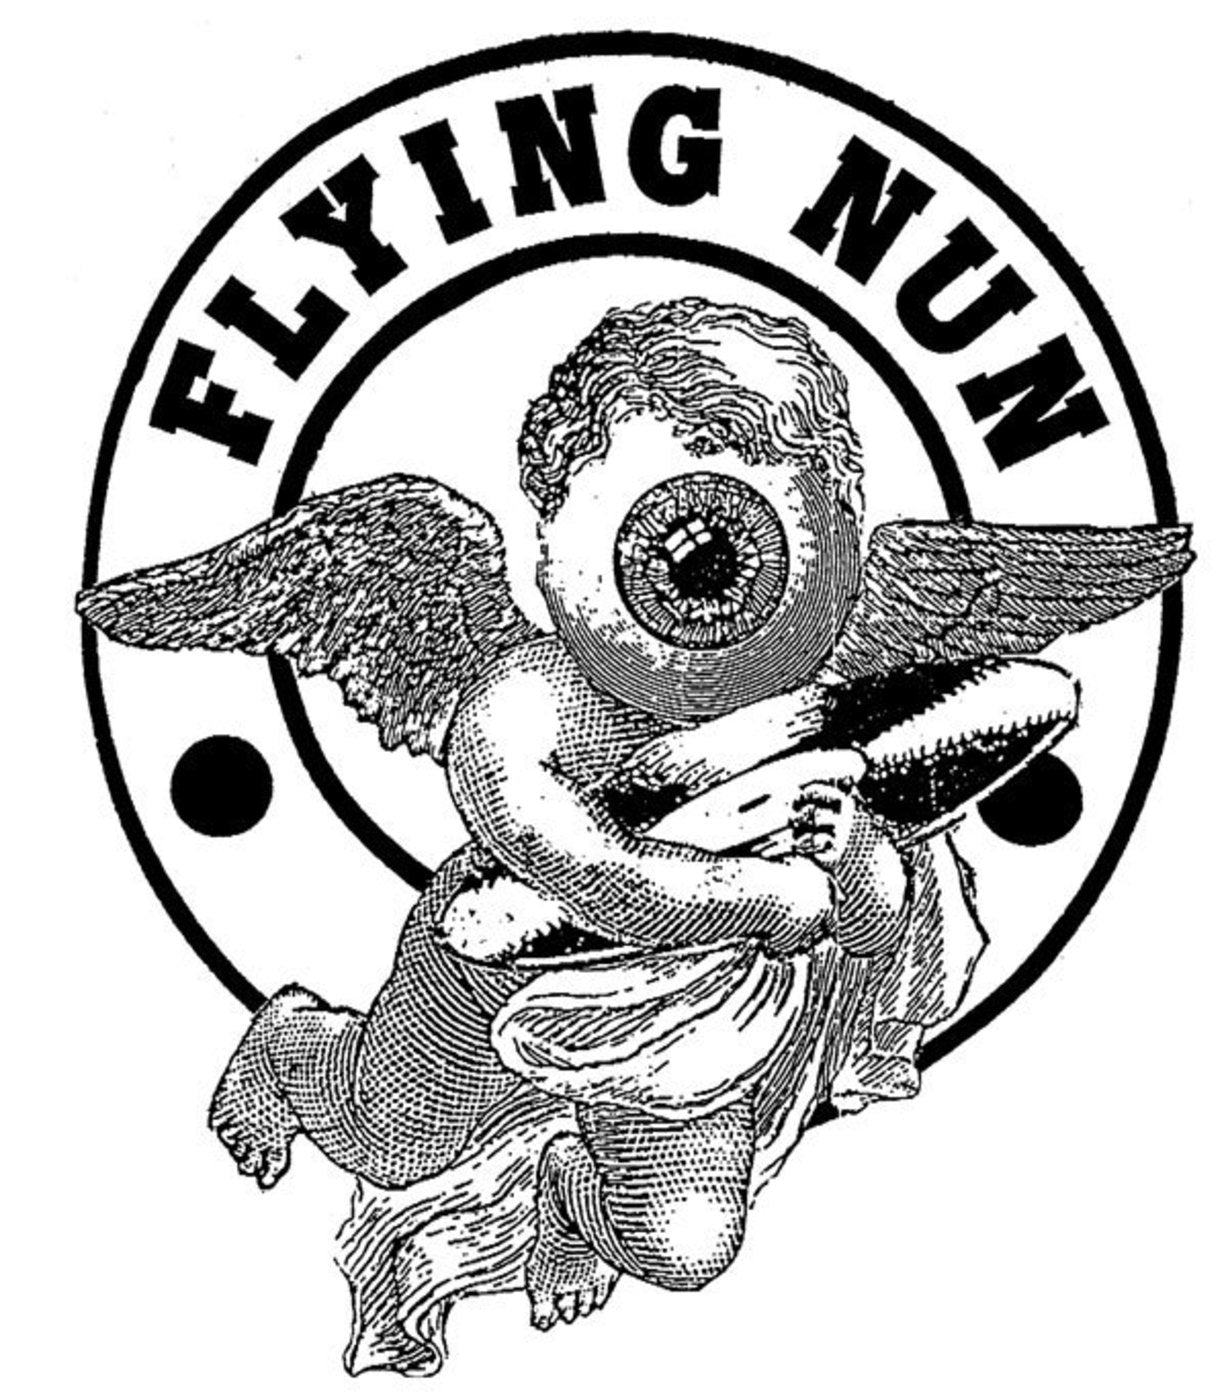 FLYING NUN RECORDS YEAR IN REVIEW 2015